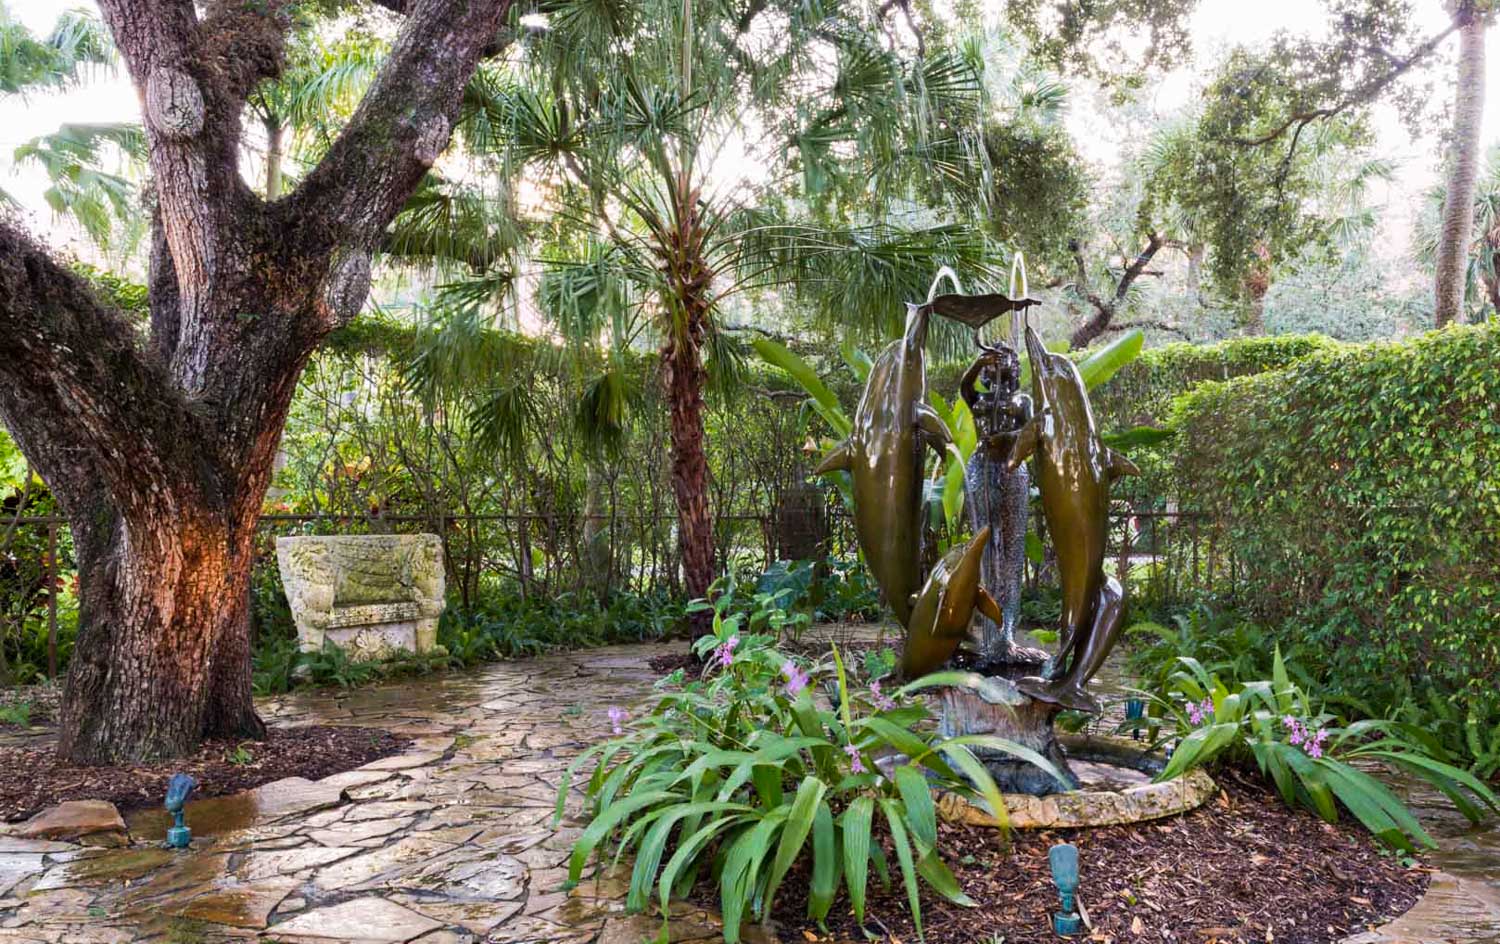 1510 SW 15 Ave - Exterior of Estate Courtyard in Backyard